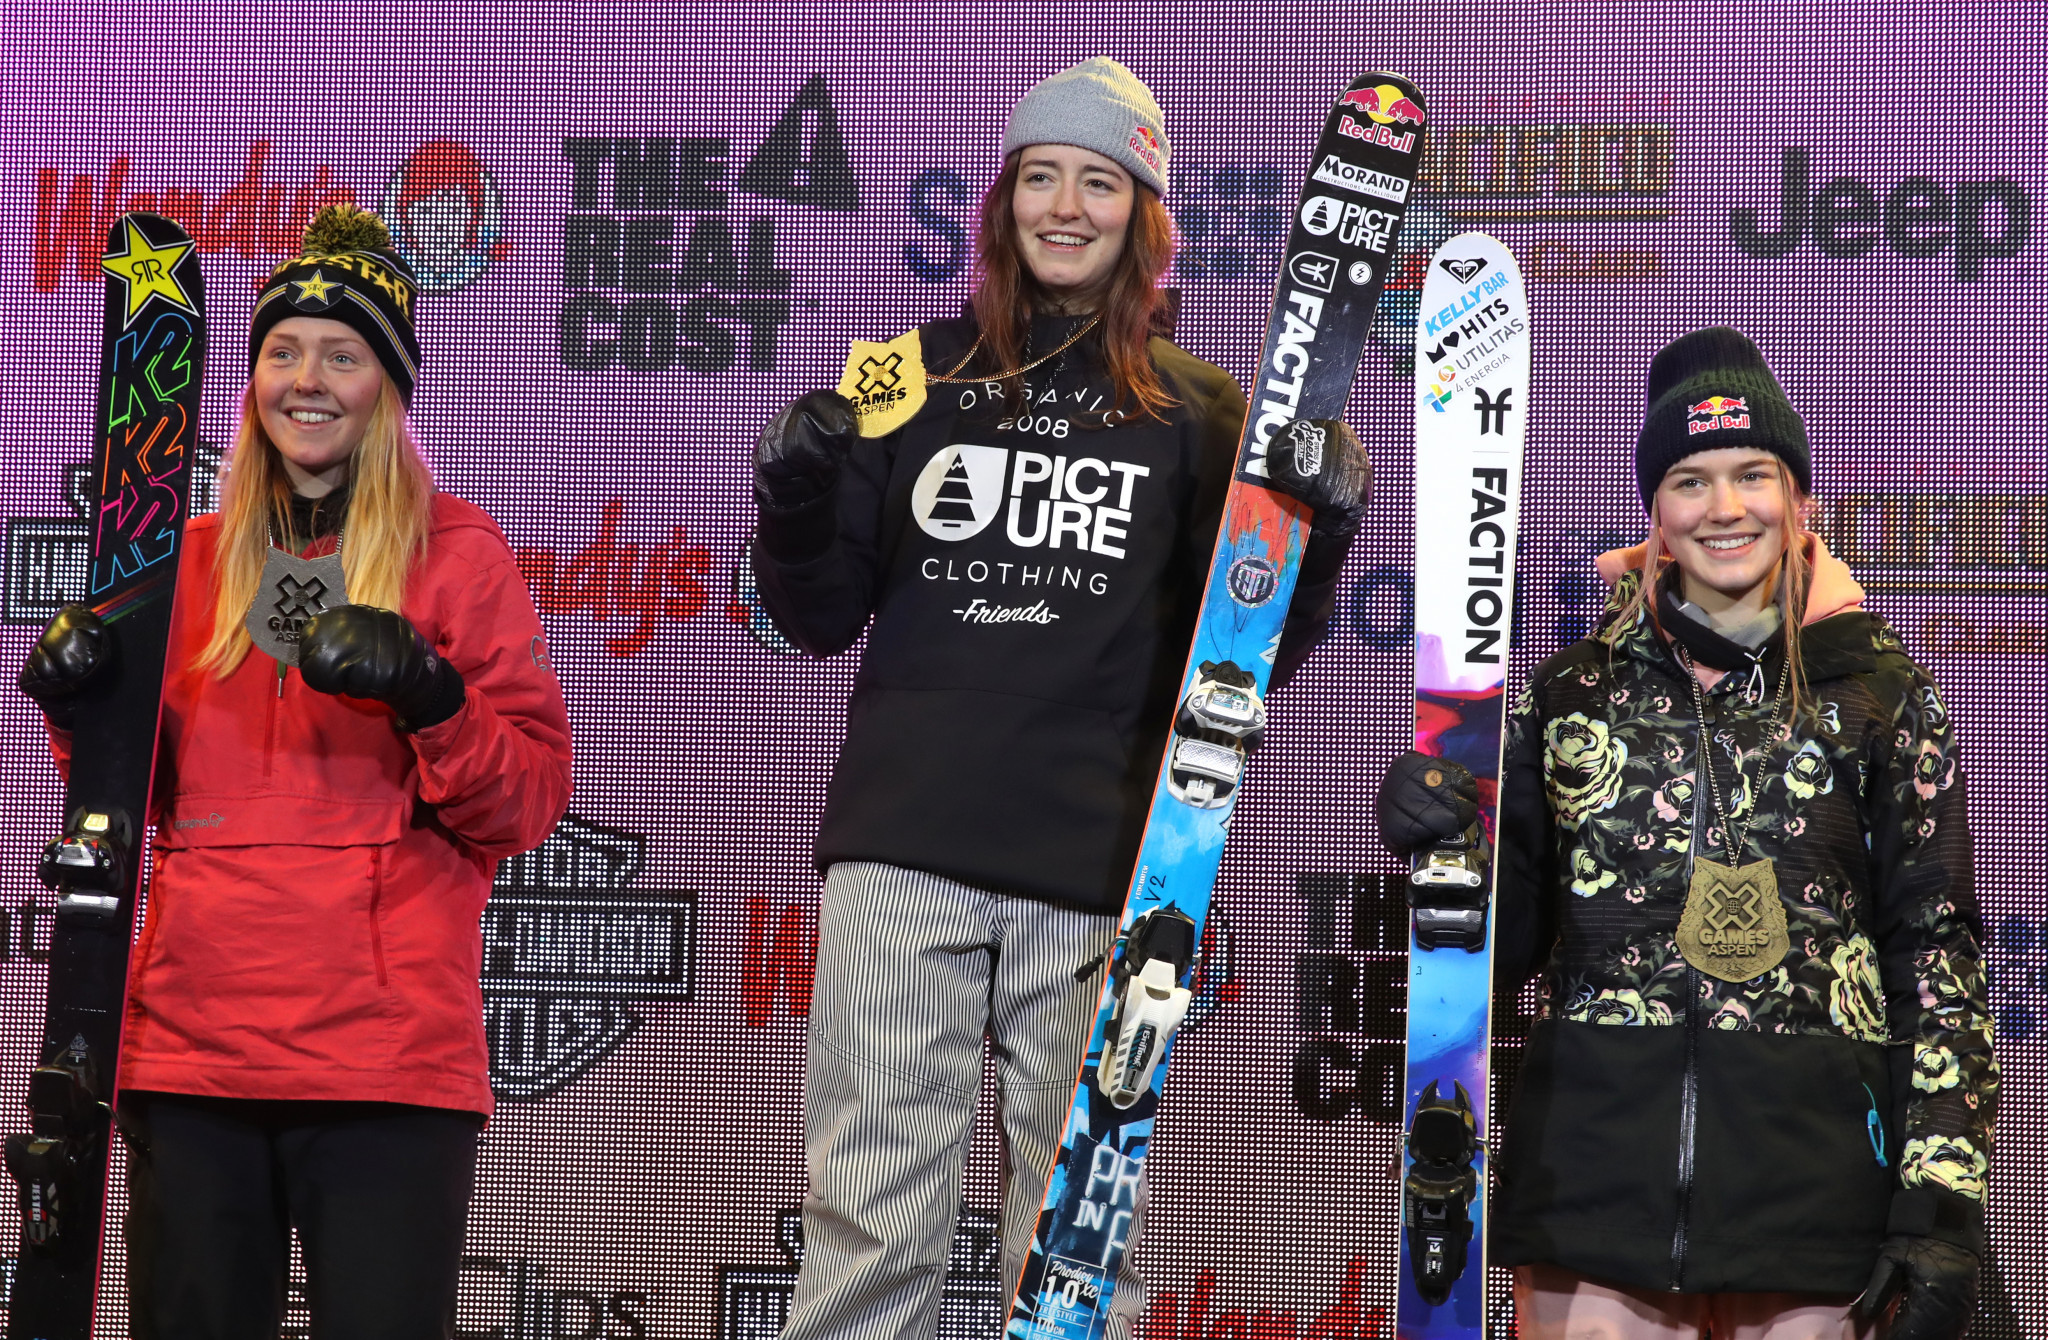 Switzerland's Mathilde Gremaud won the women's ski big air final at the Winter X Games, with Norway's Johanne Killi in second and Estonia's Kelly Sildaru third ©Getty Images